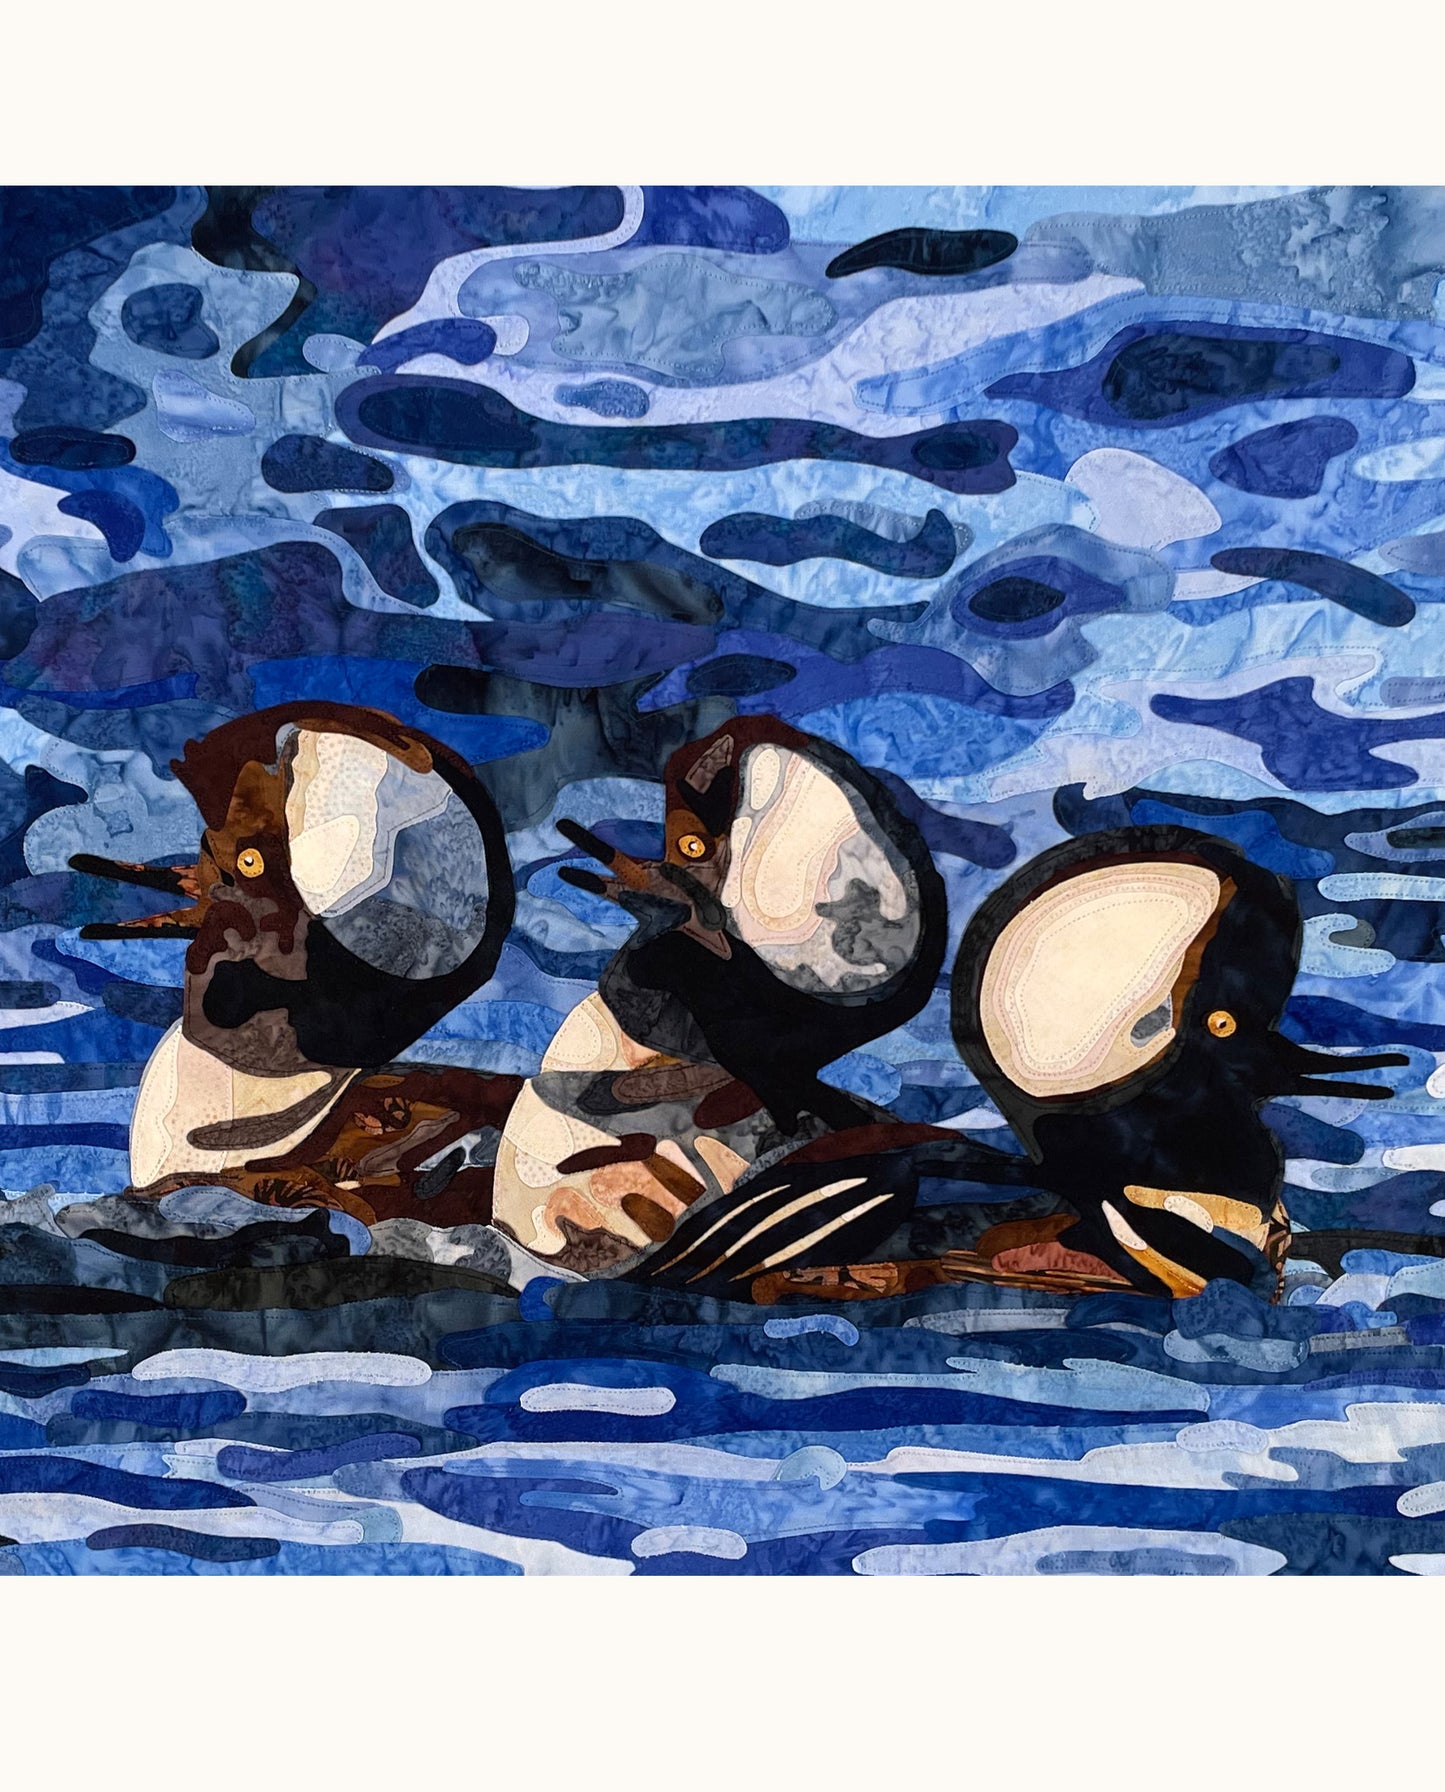 Fabric Collage Art - Hooded Mergansers